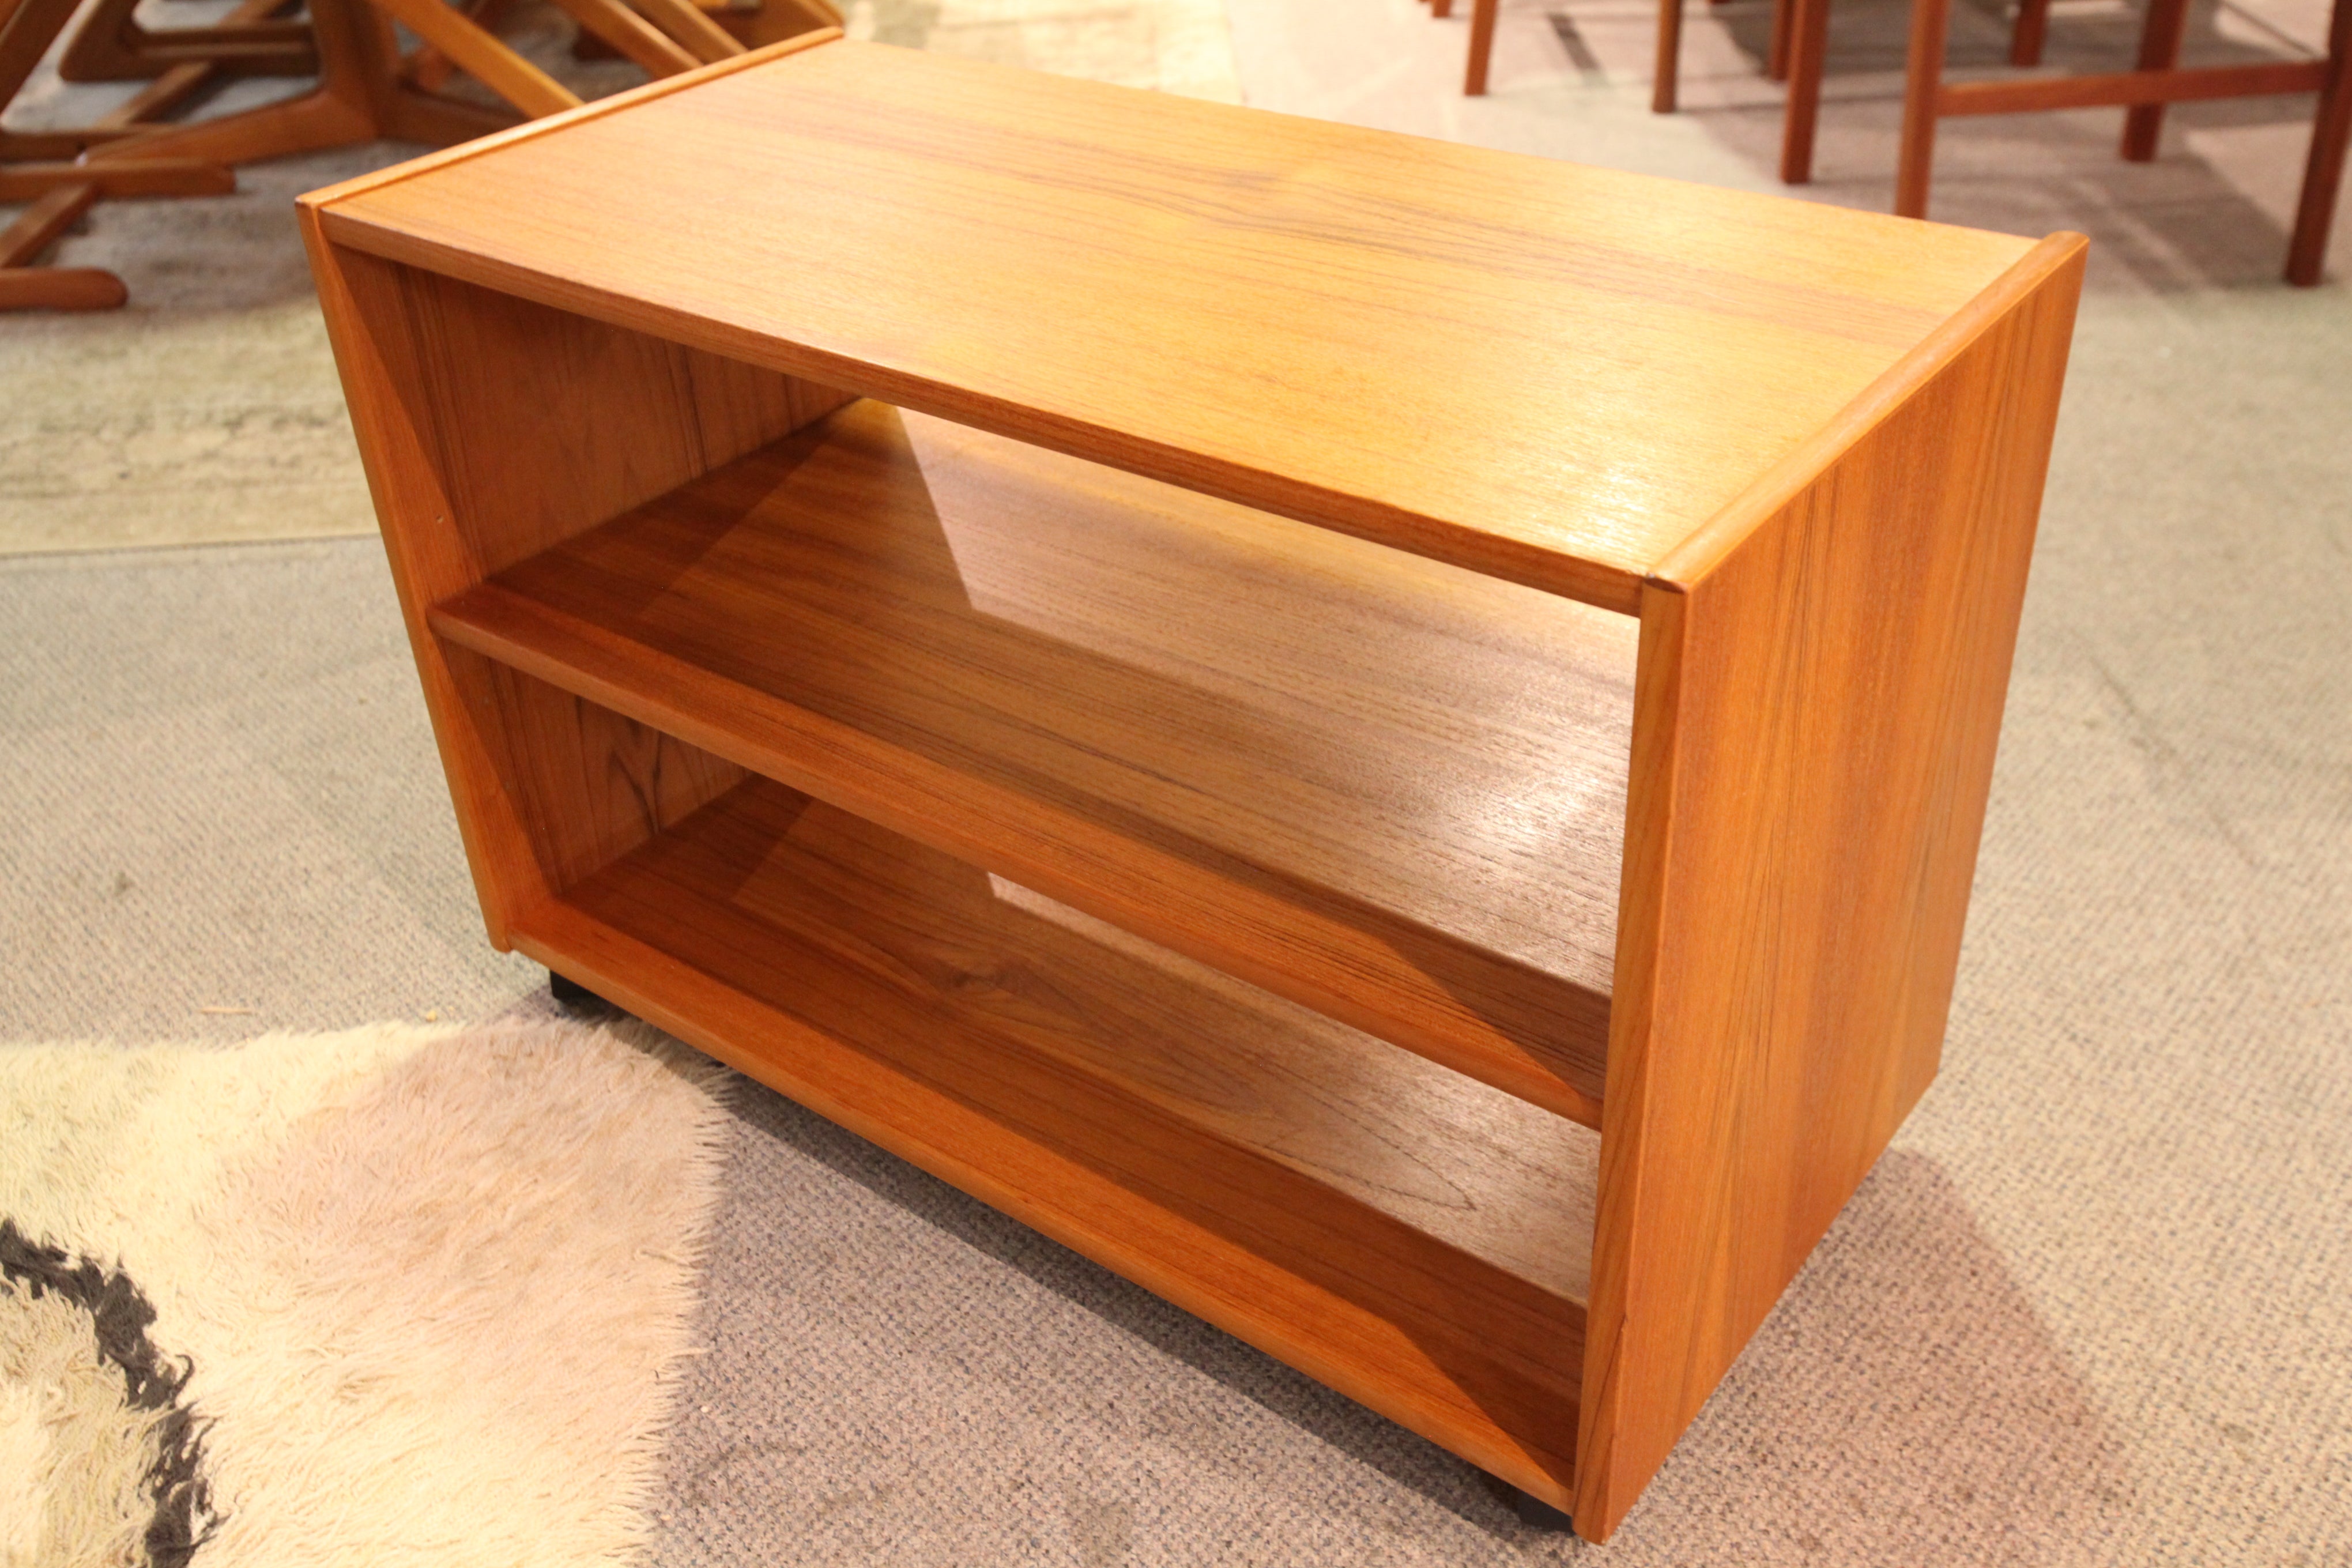 Vintage Teak Stereo / TV Stand on Casters (33" x 16" x 22"H)